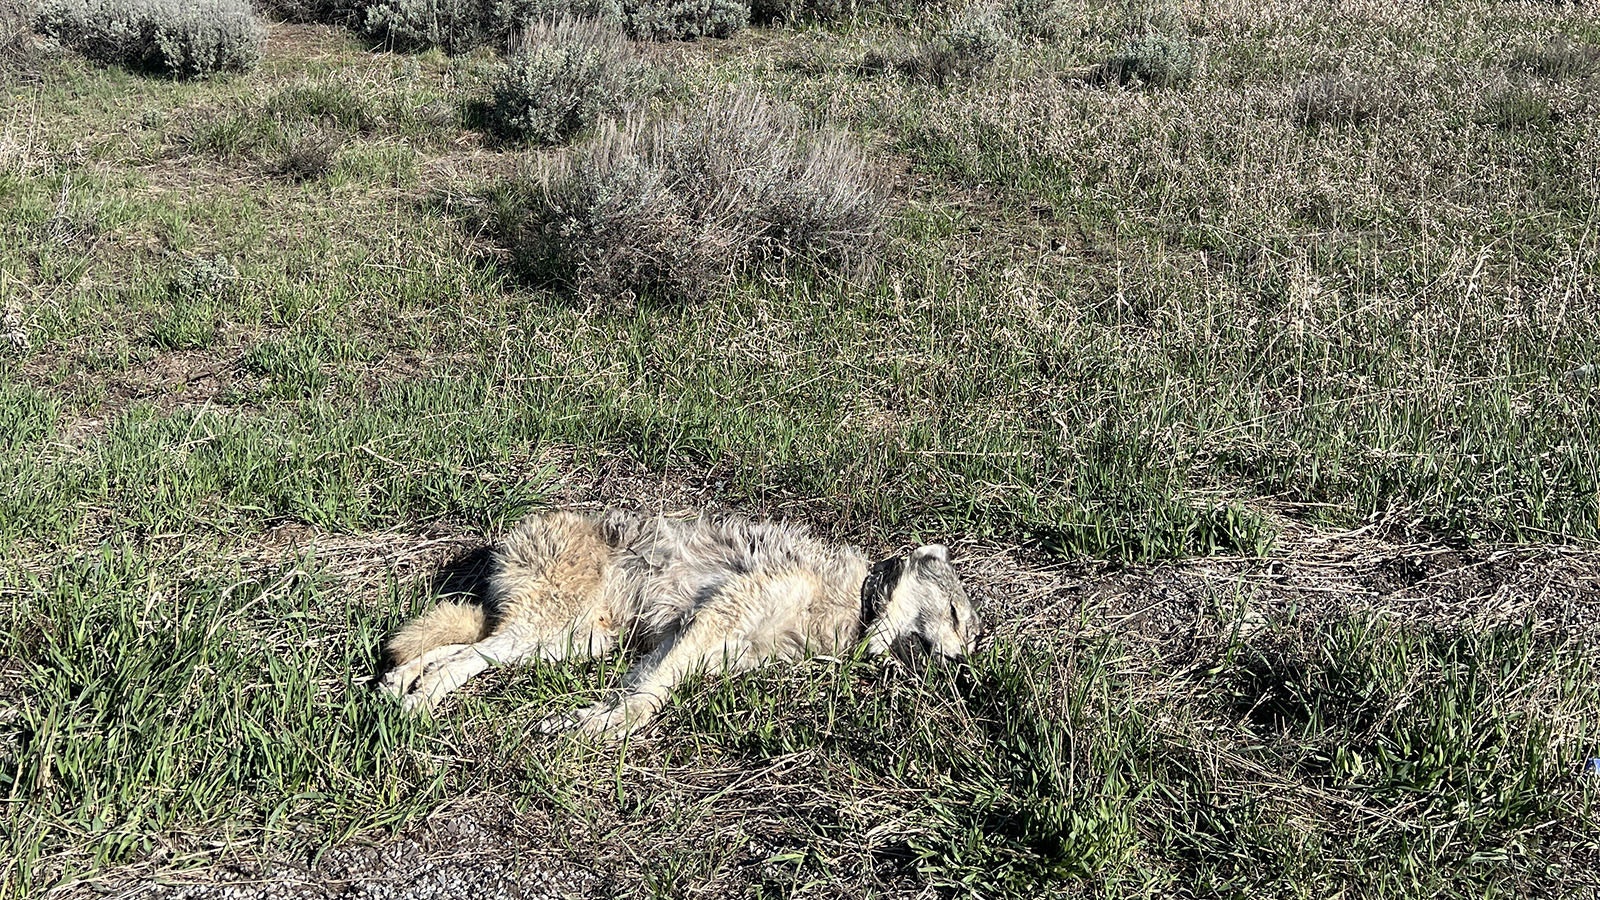 This adult make wolf was struck and killed by a vehicle on Friday in Grand Teton National Park.